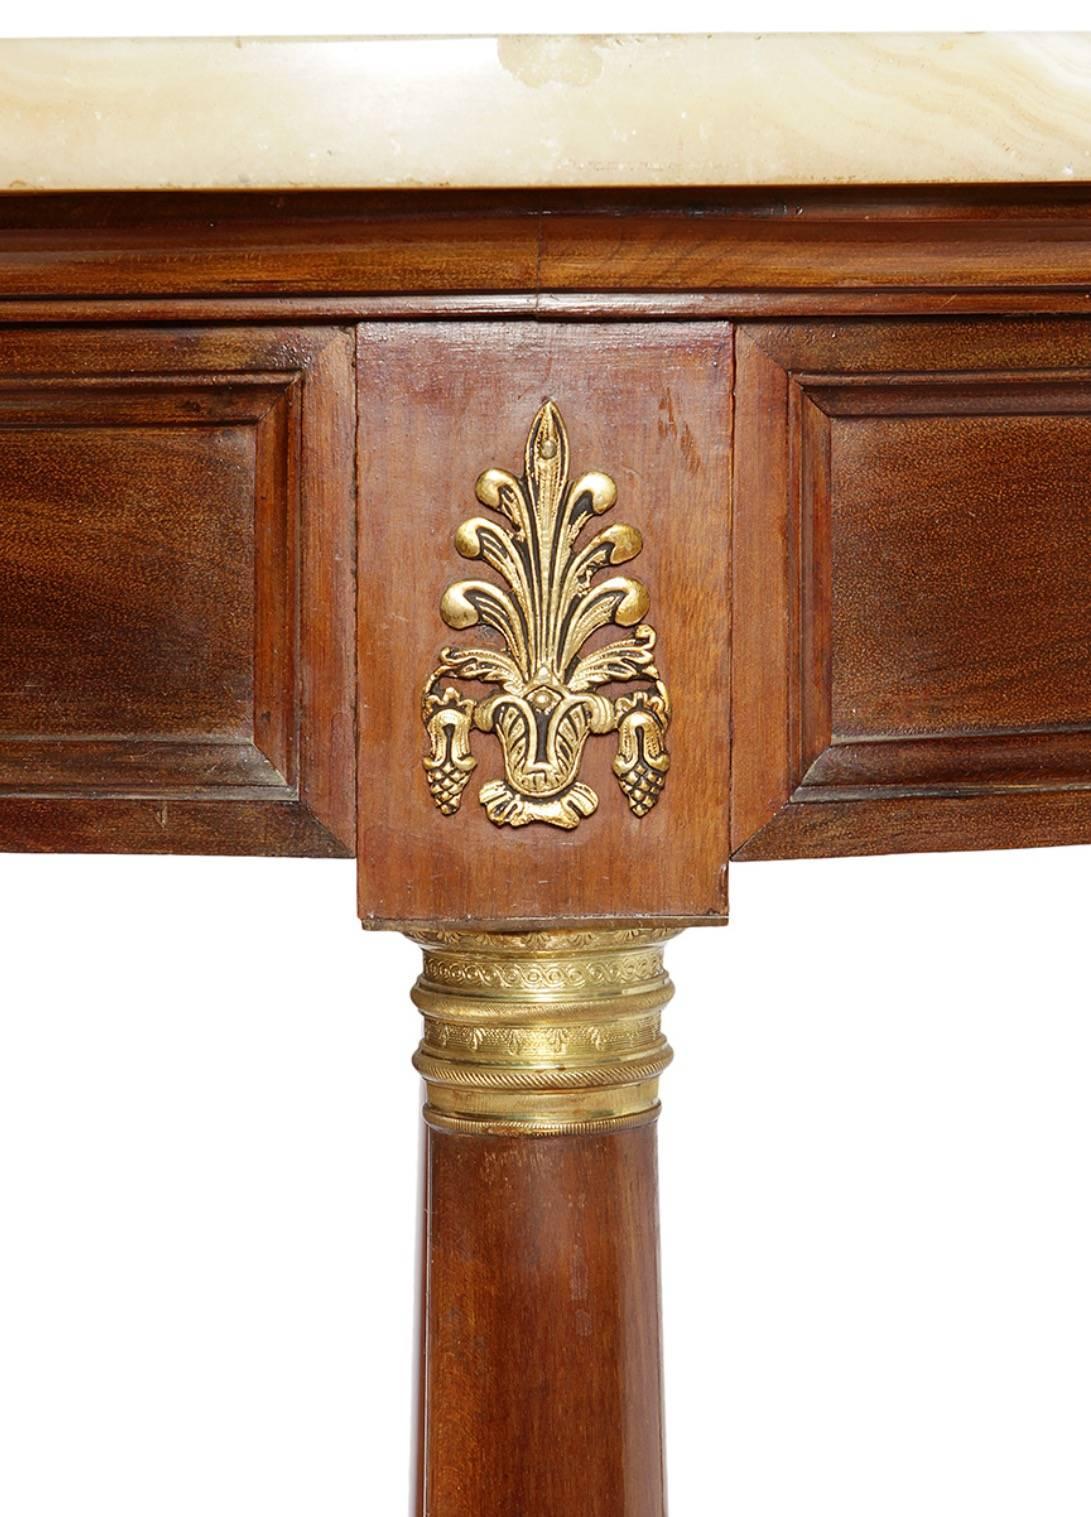 Auxiliary table Empire style, with structure in wood in its color, ornamental applications in bronze and onyx bronze. Of circular plan, it rises on four legs in the form of a column, united by a molded 